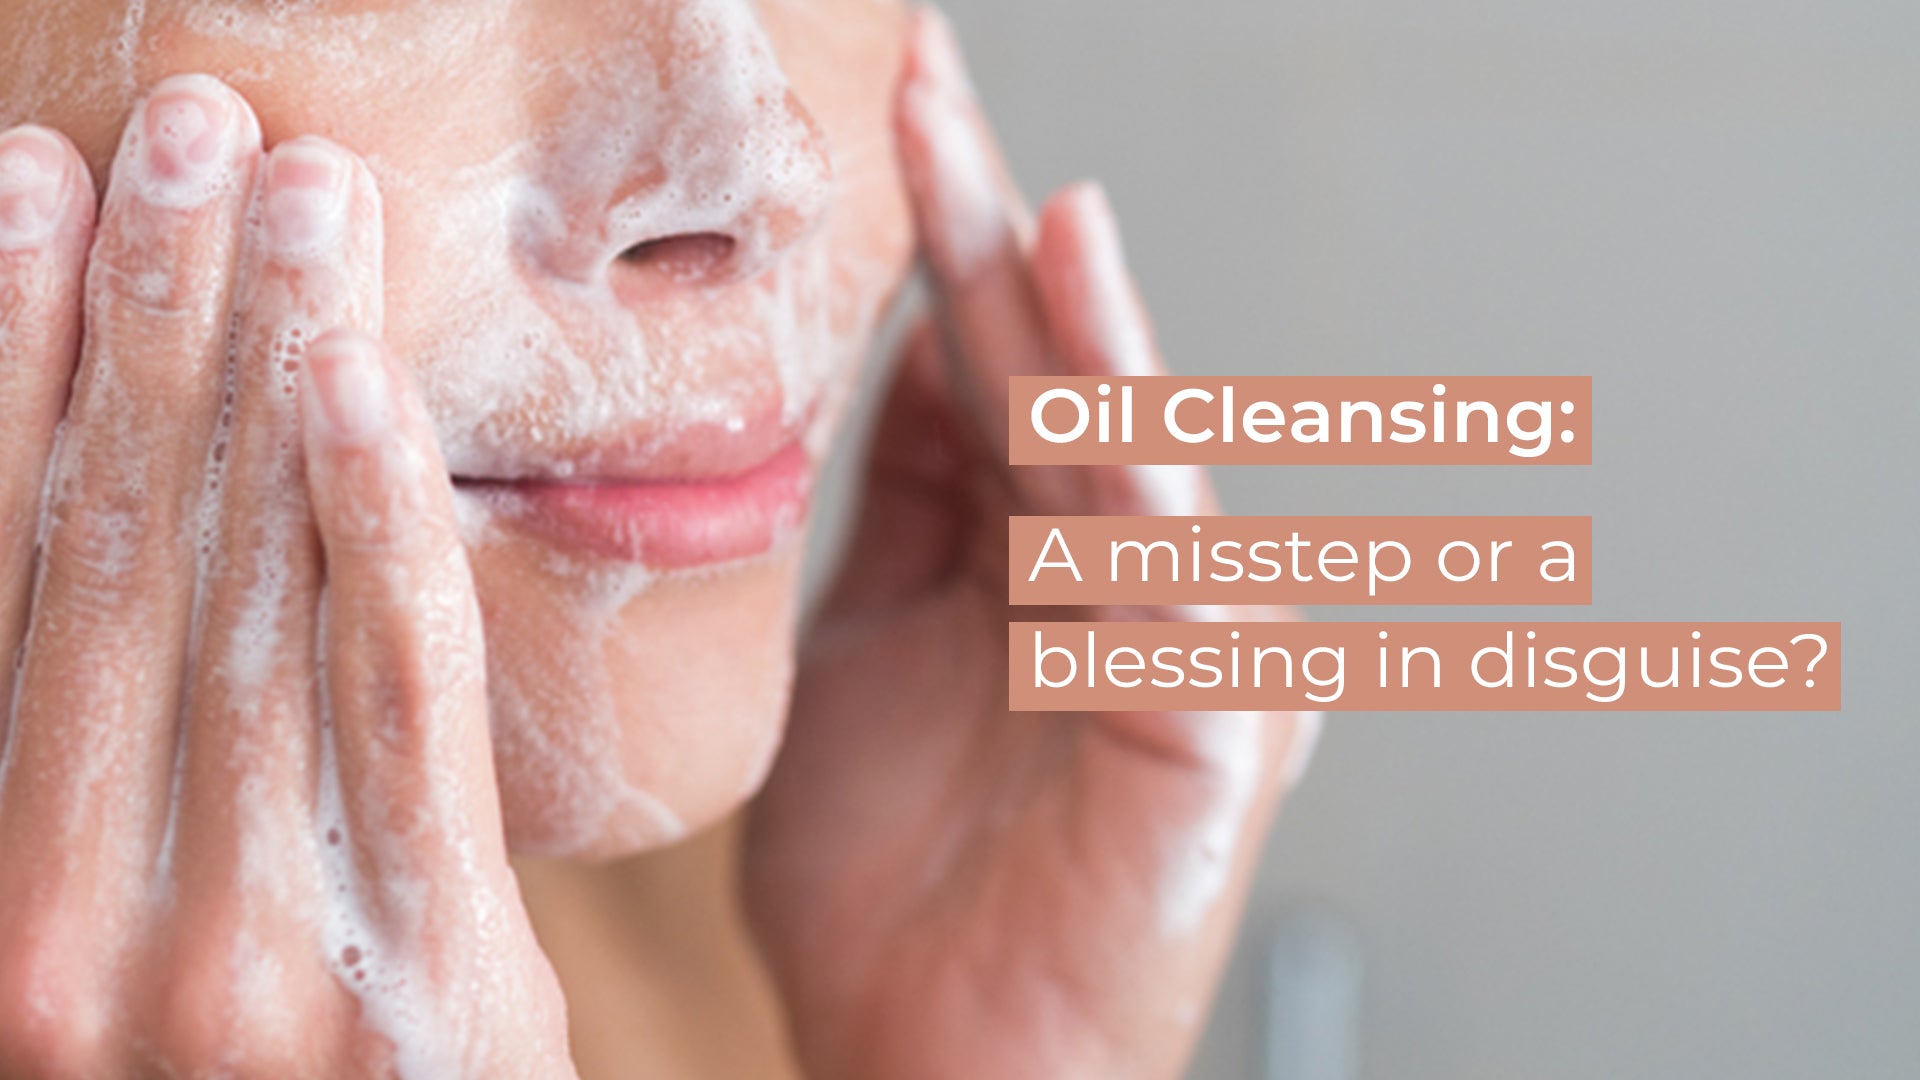 Oil cleansing: A misstep or a blessing in disguise?